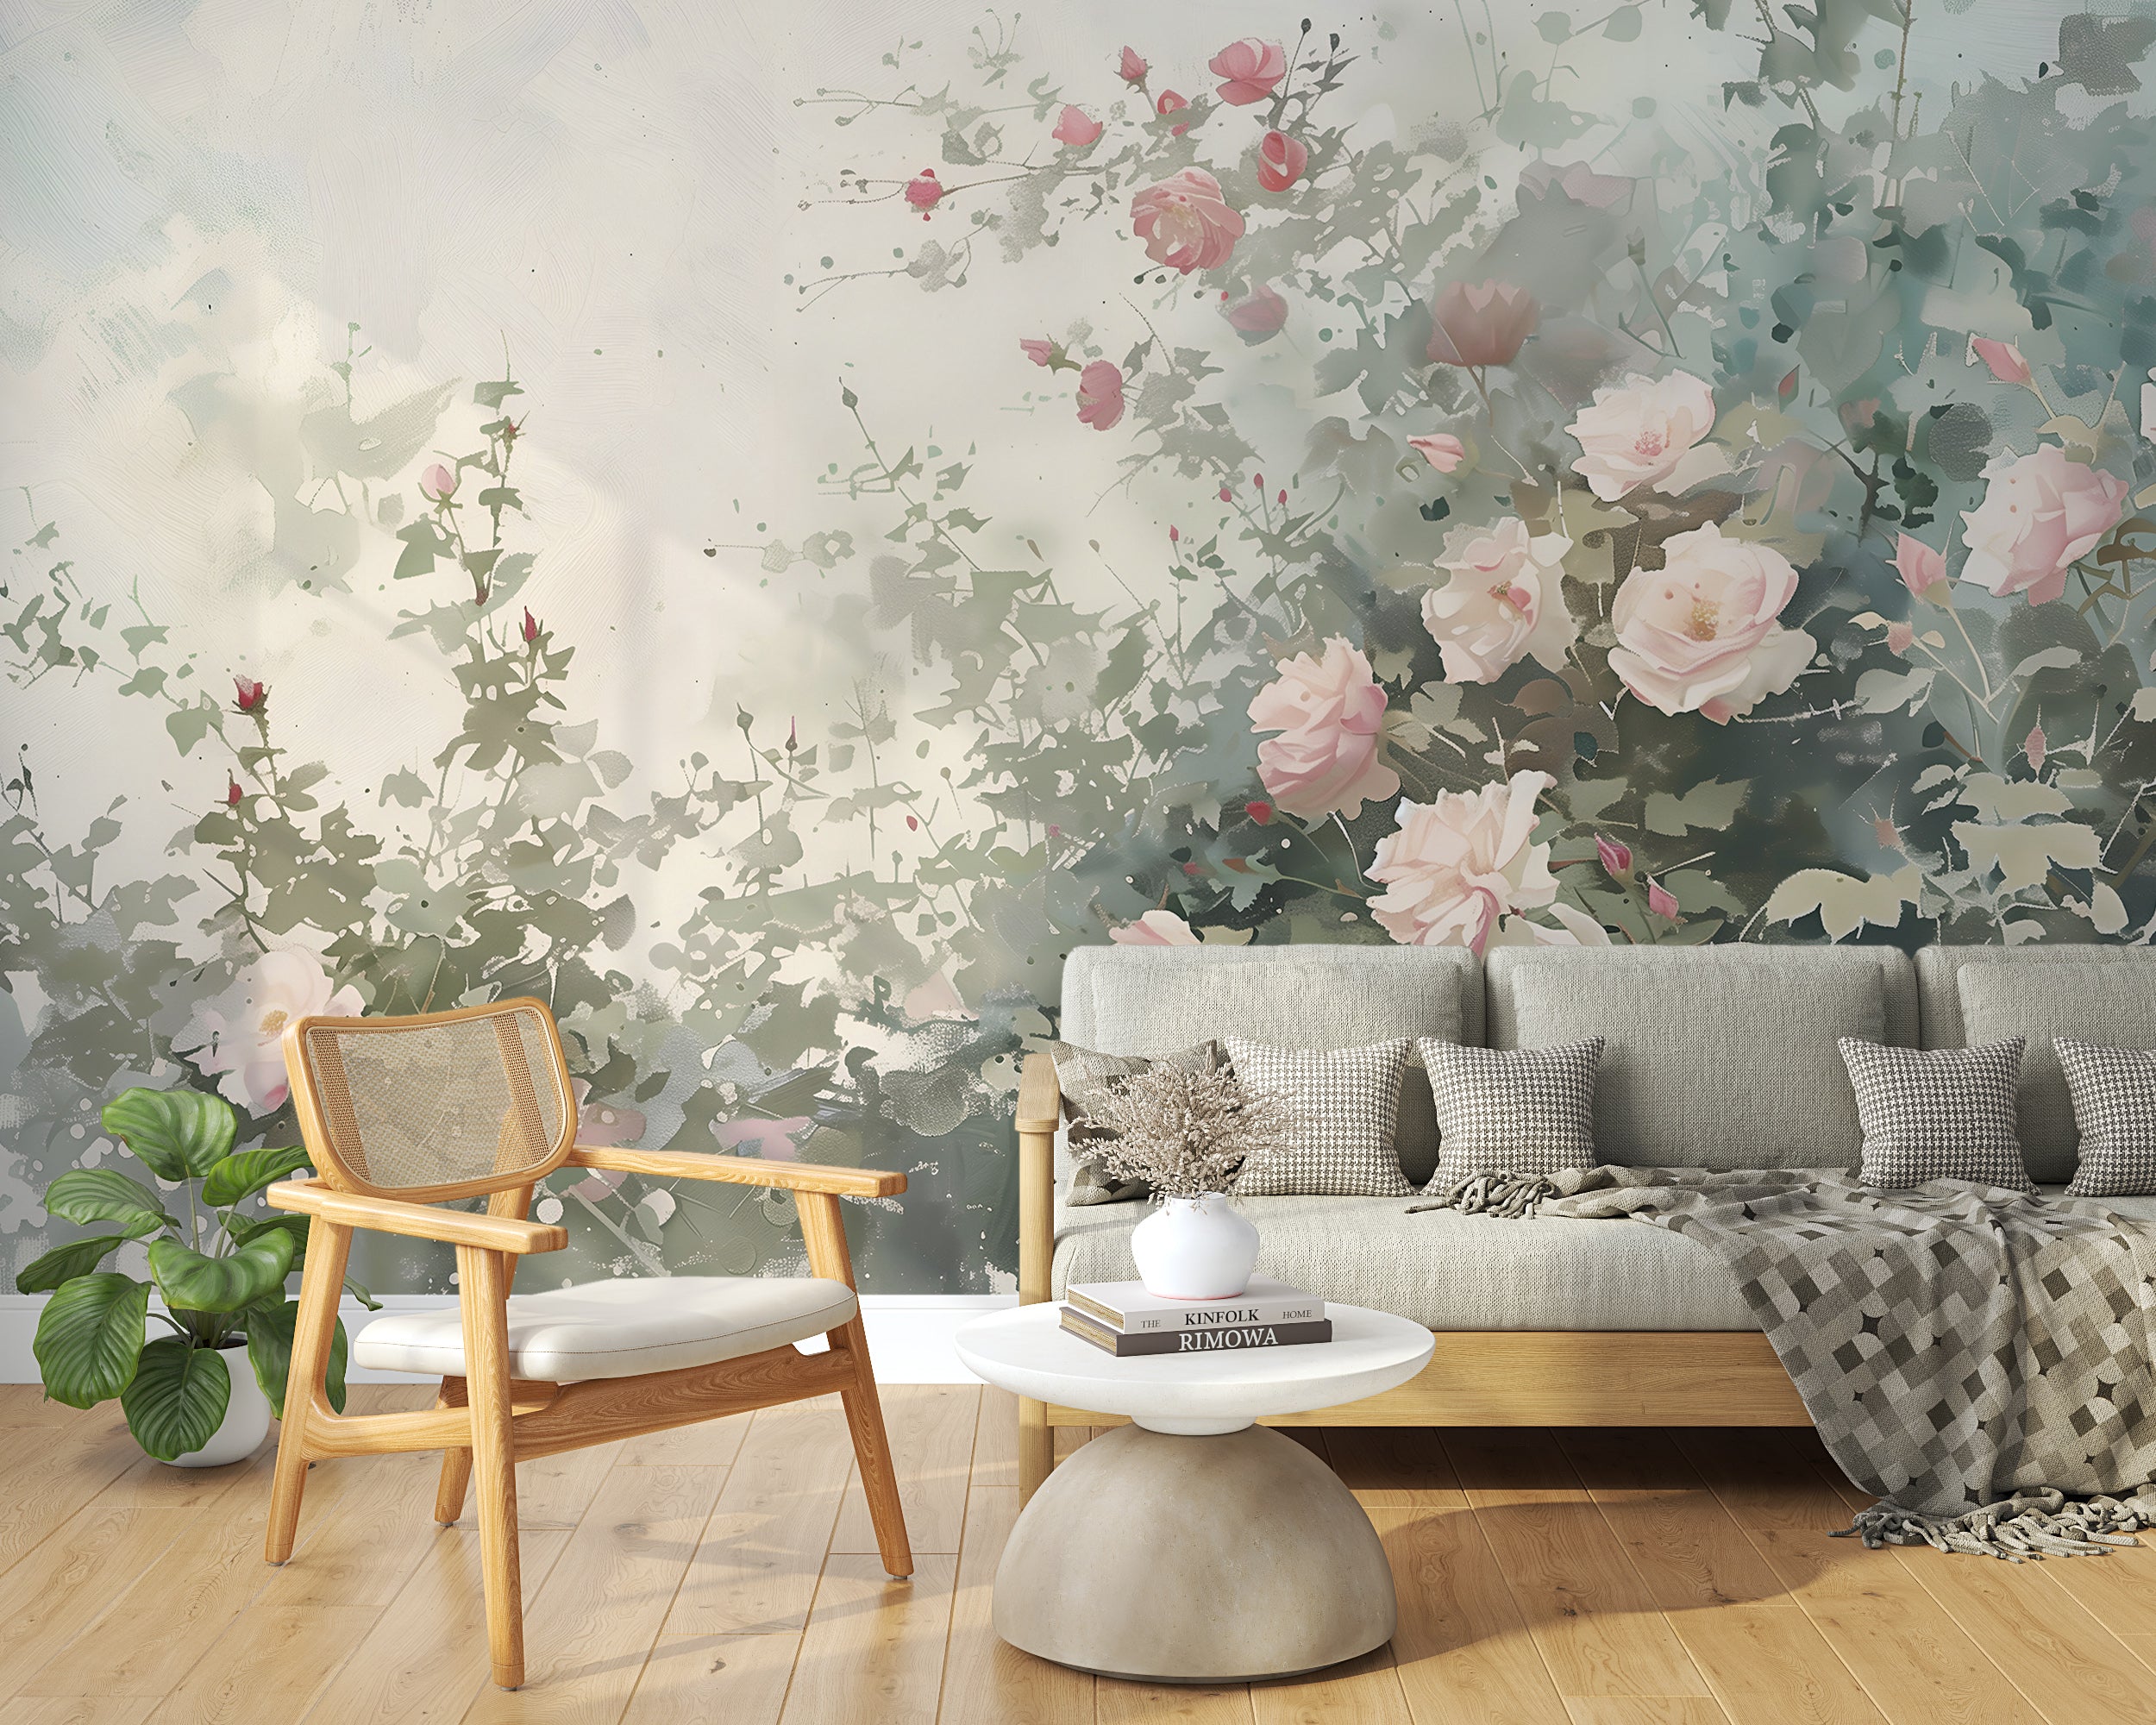 Watercolor Wild Roses Wallpaper, Peel and Stick Flower Bush Mural, Soft Green Botanical Wallpaper, Removable Floral Wall Art